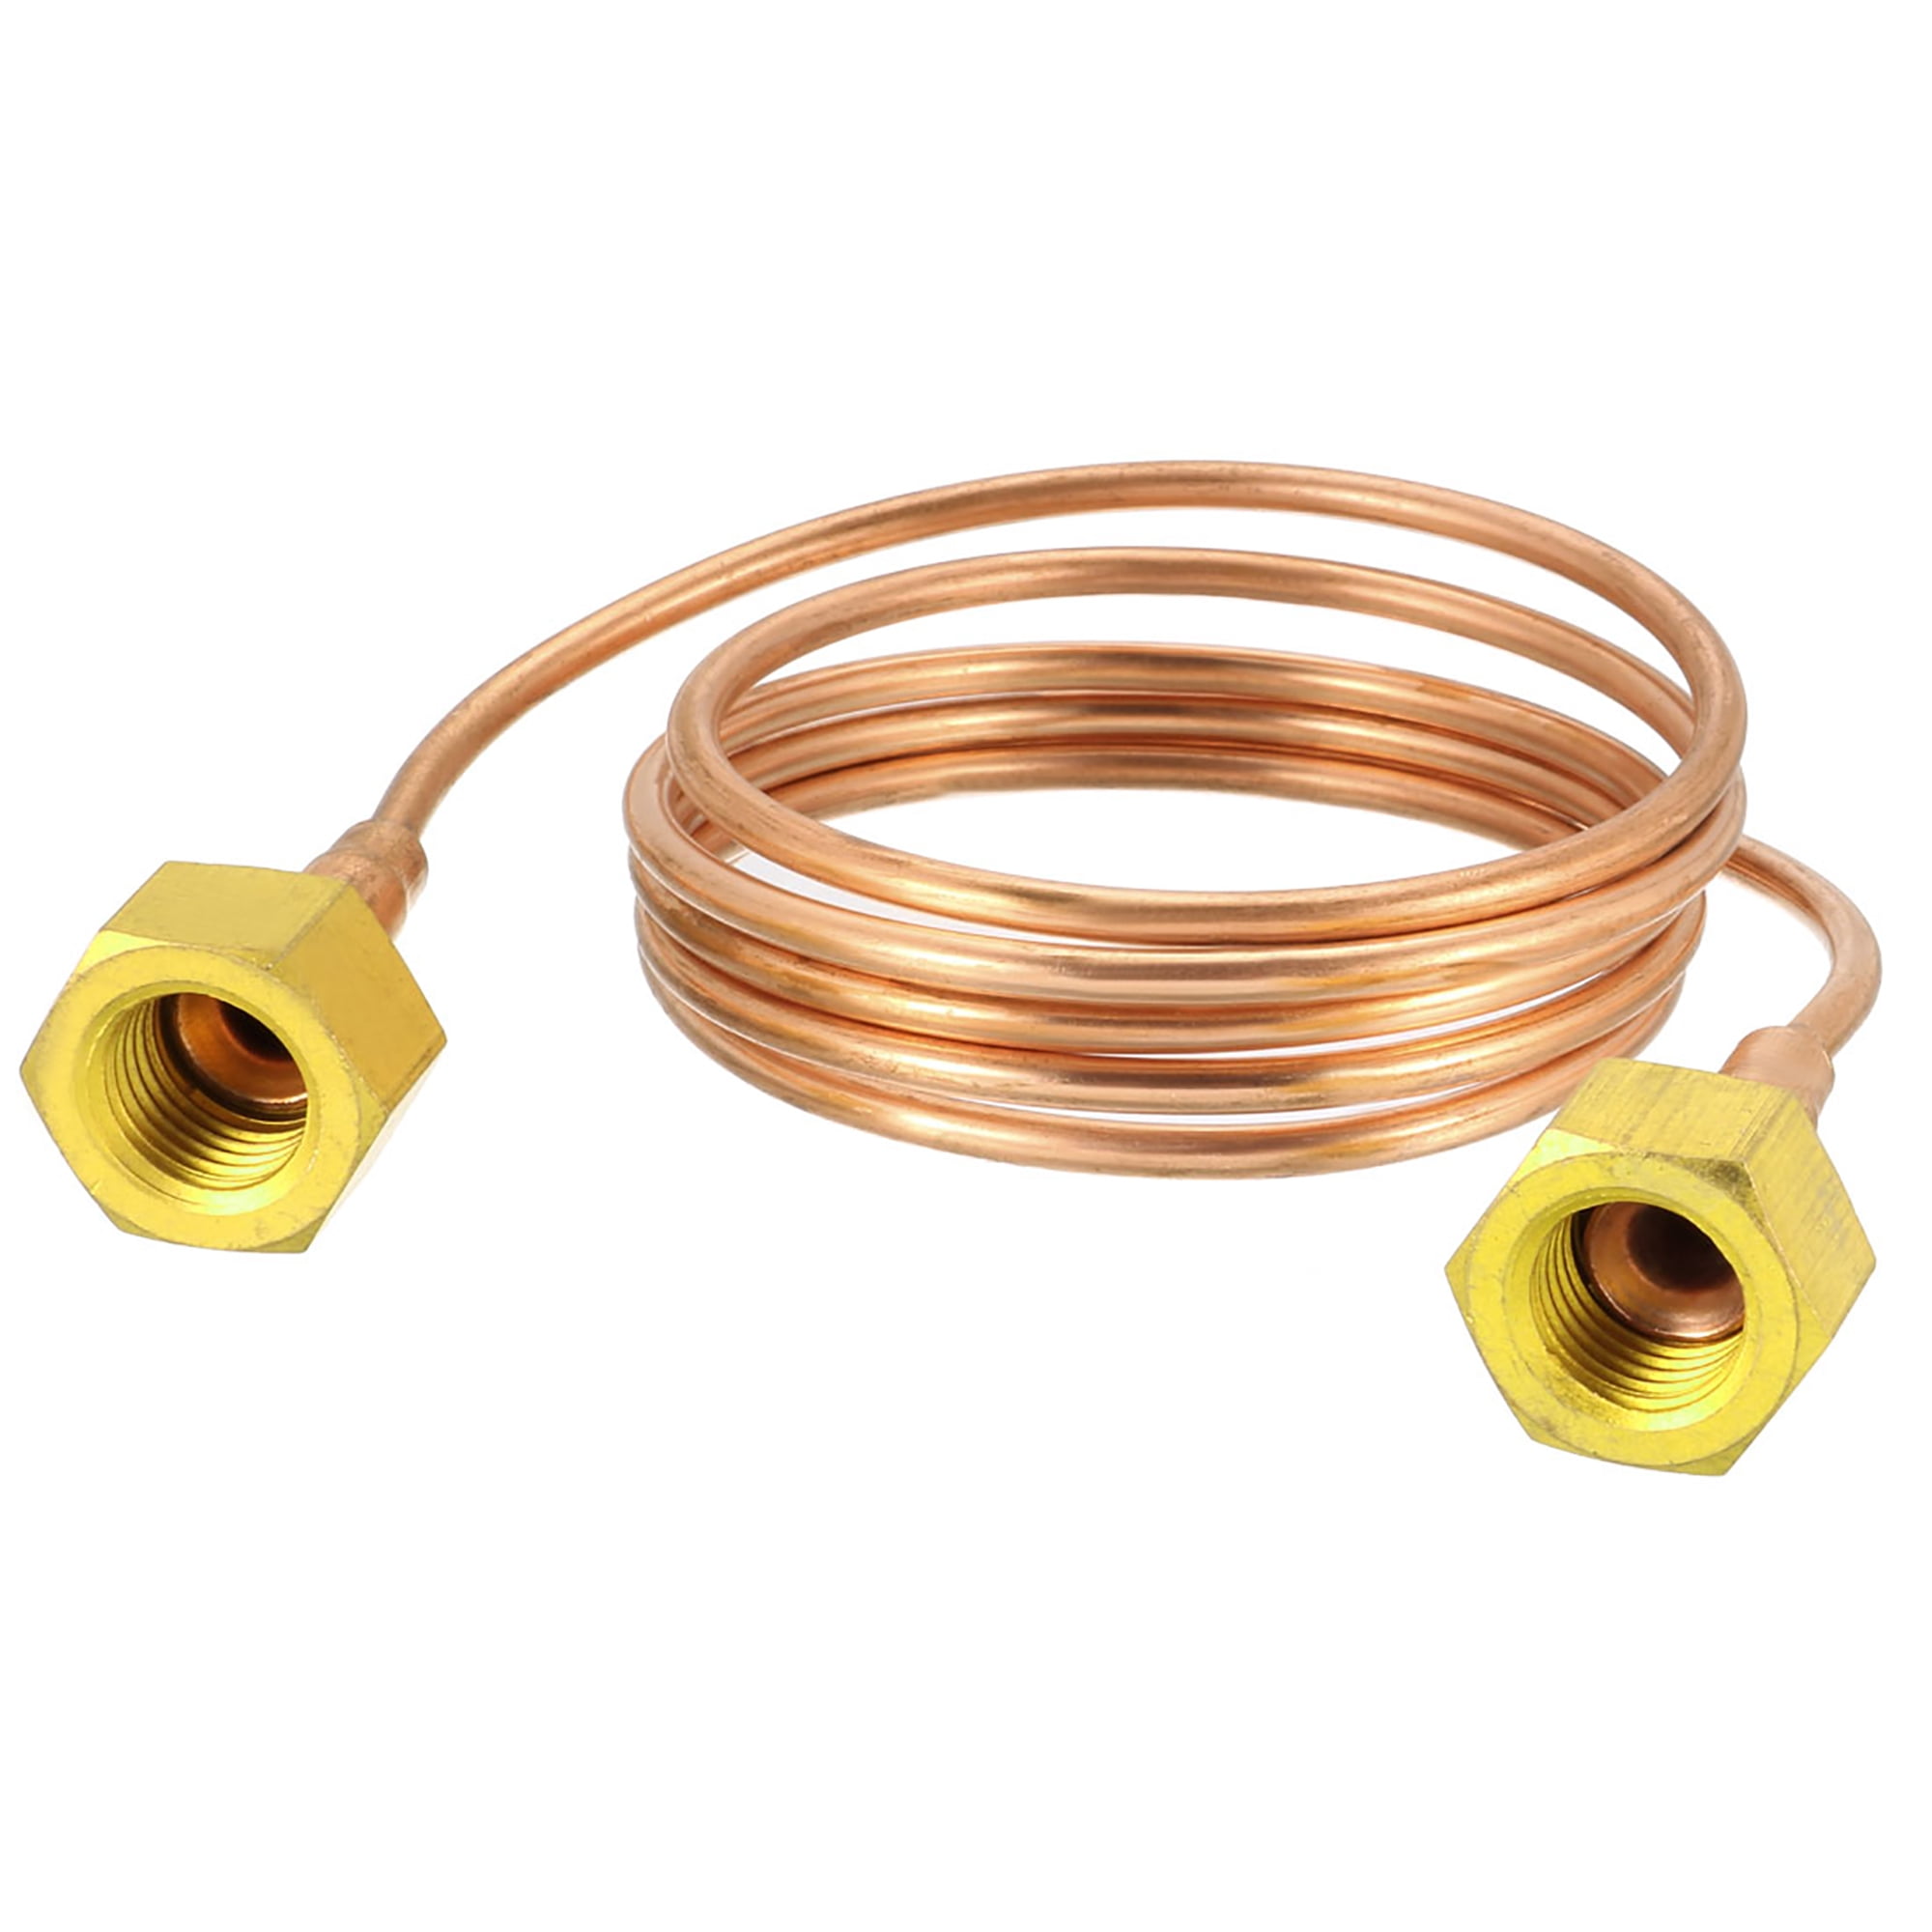 Tube Flare Fitting Copper Tube 5.2mm OD 3.2mm ID for Refrigeration Tubing 10pcs 